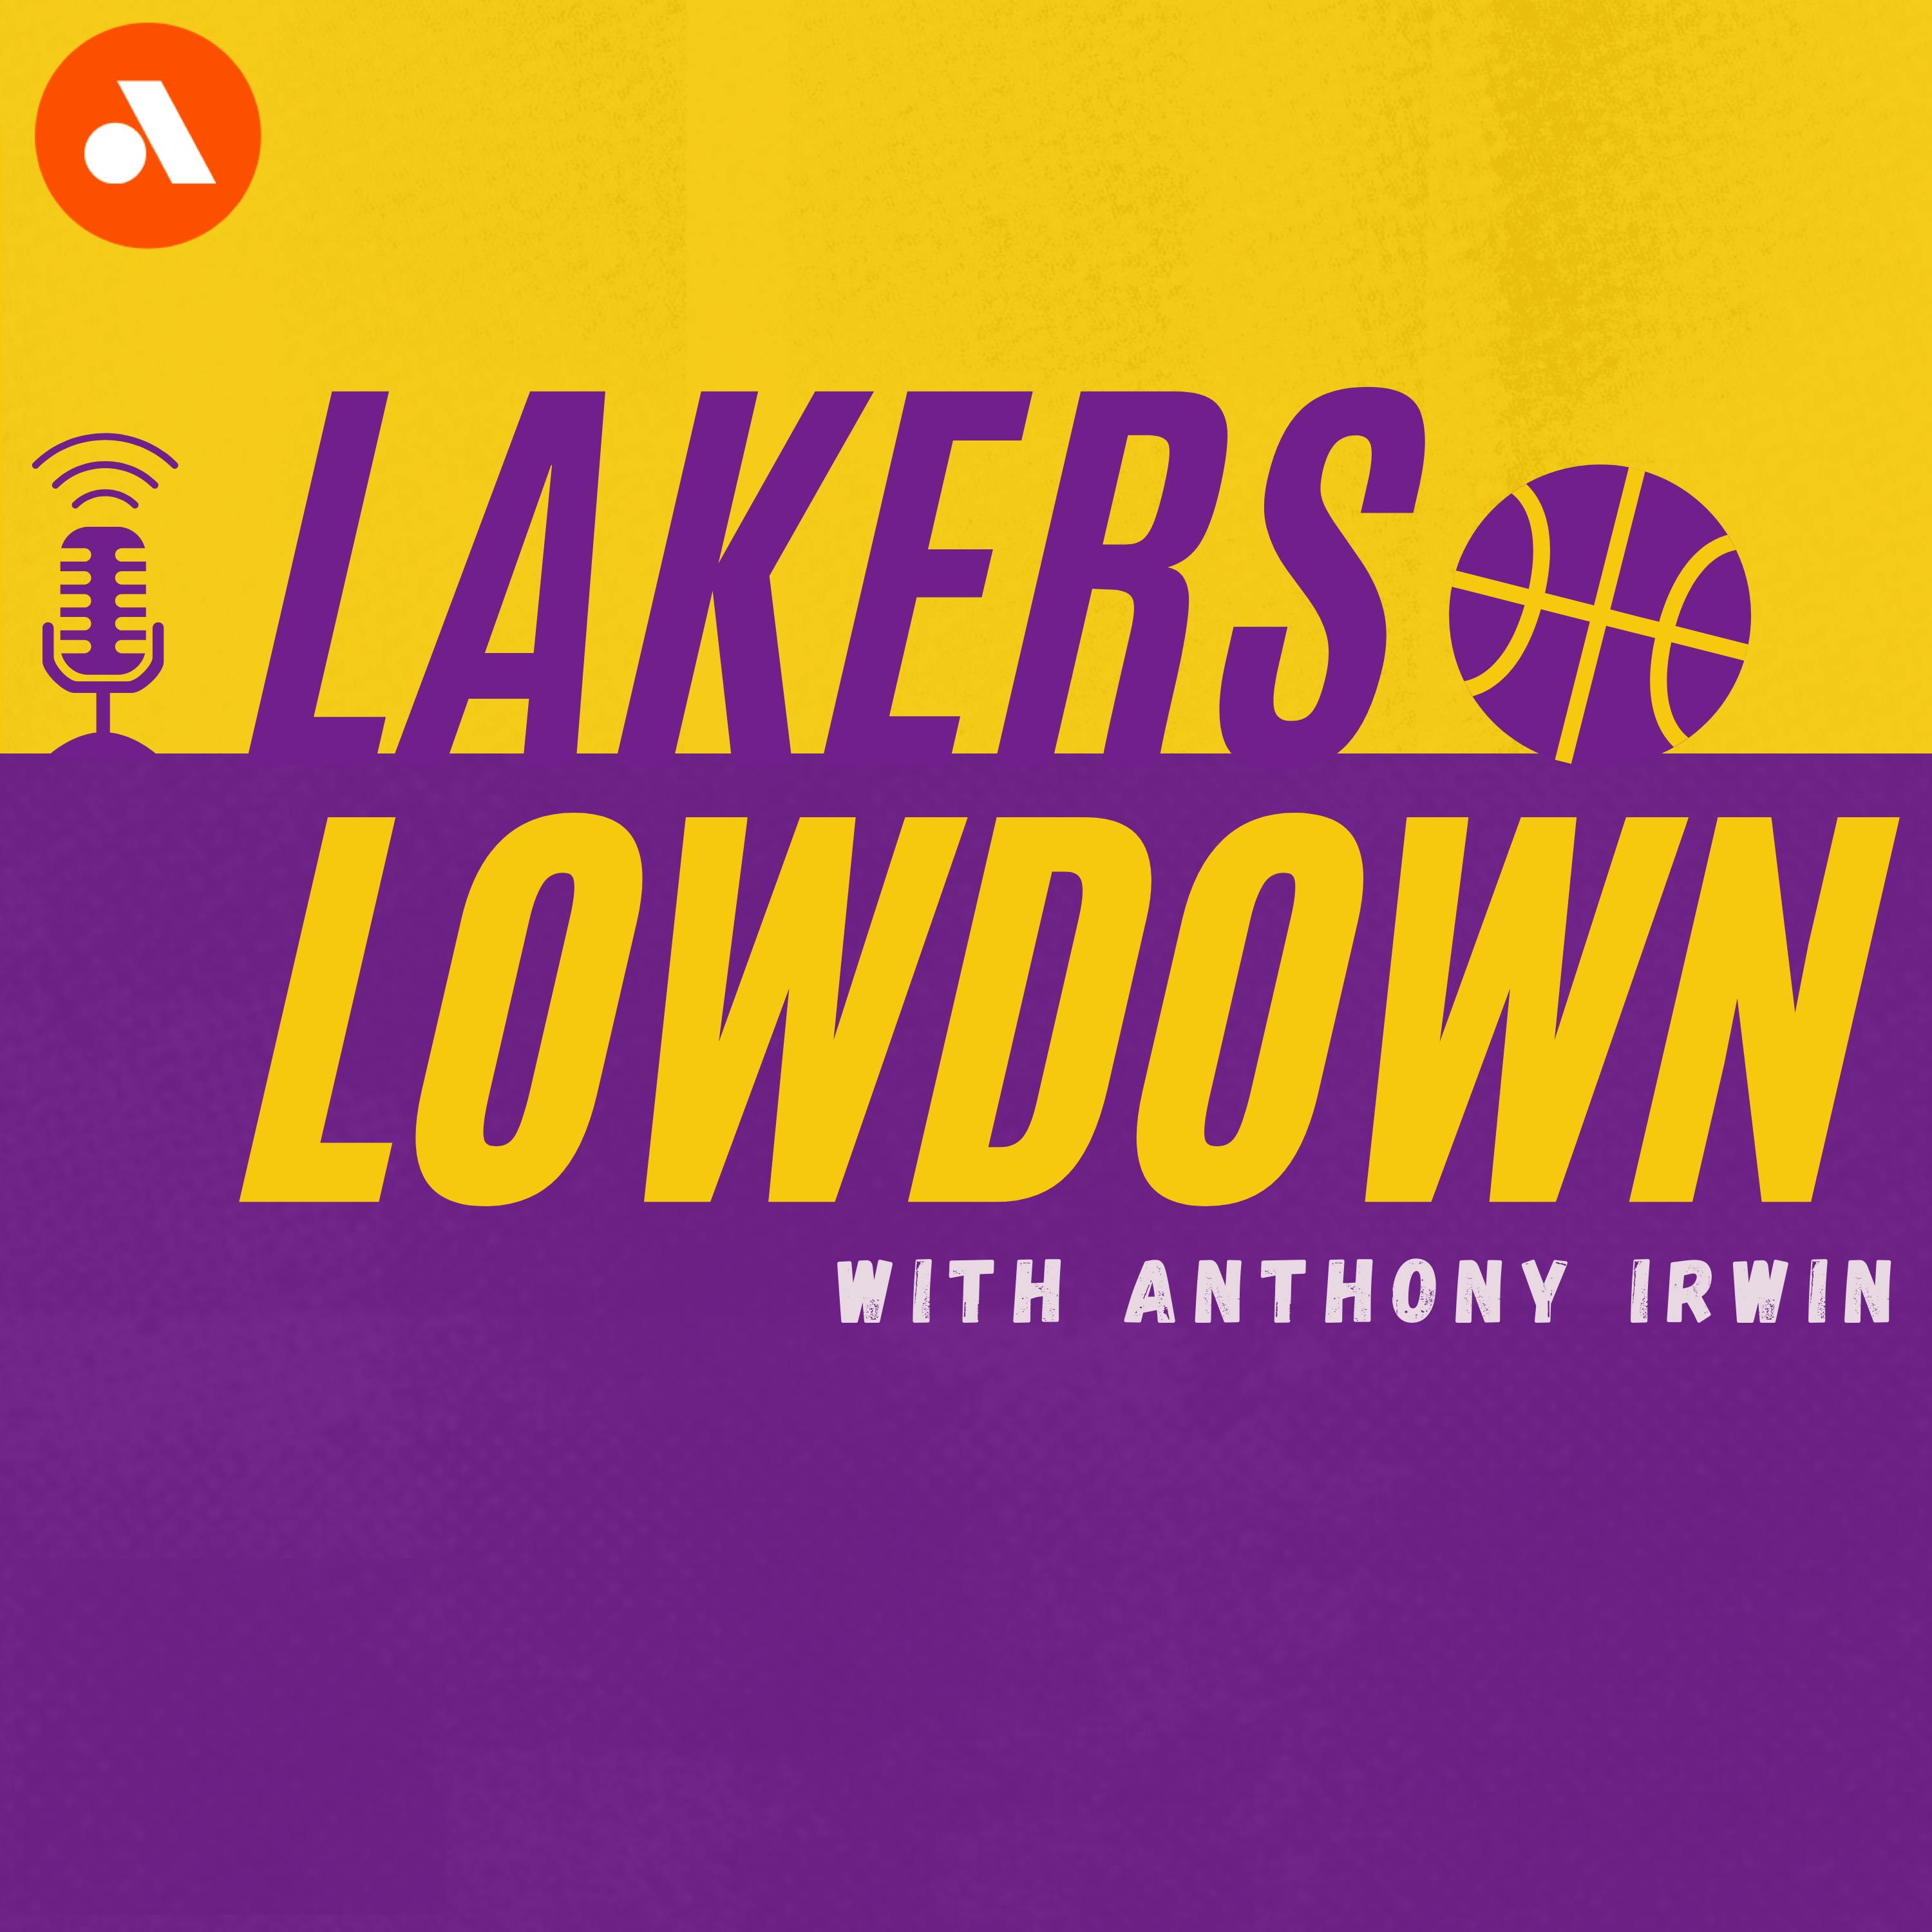 APPATEASER: Anthony actually speaks positively about Chris Paul